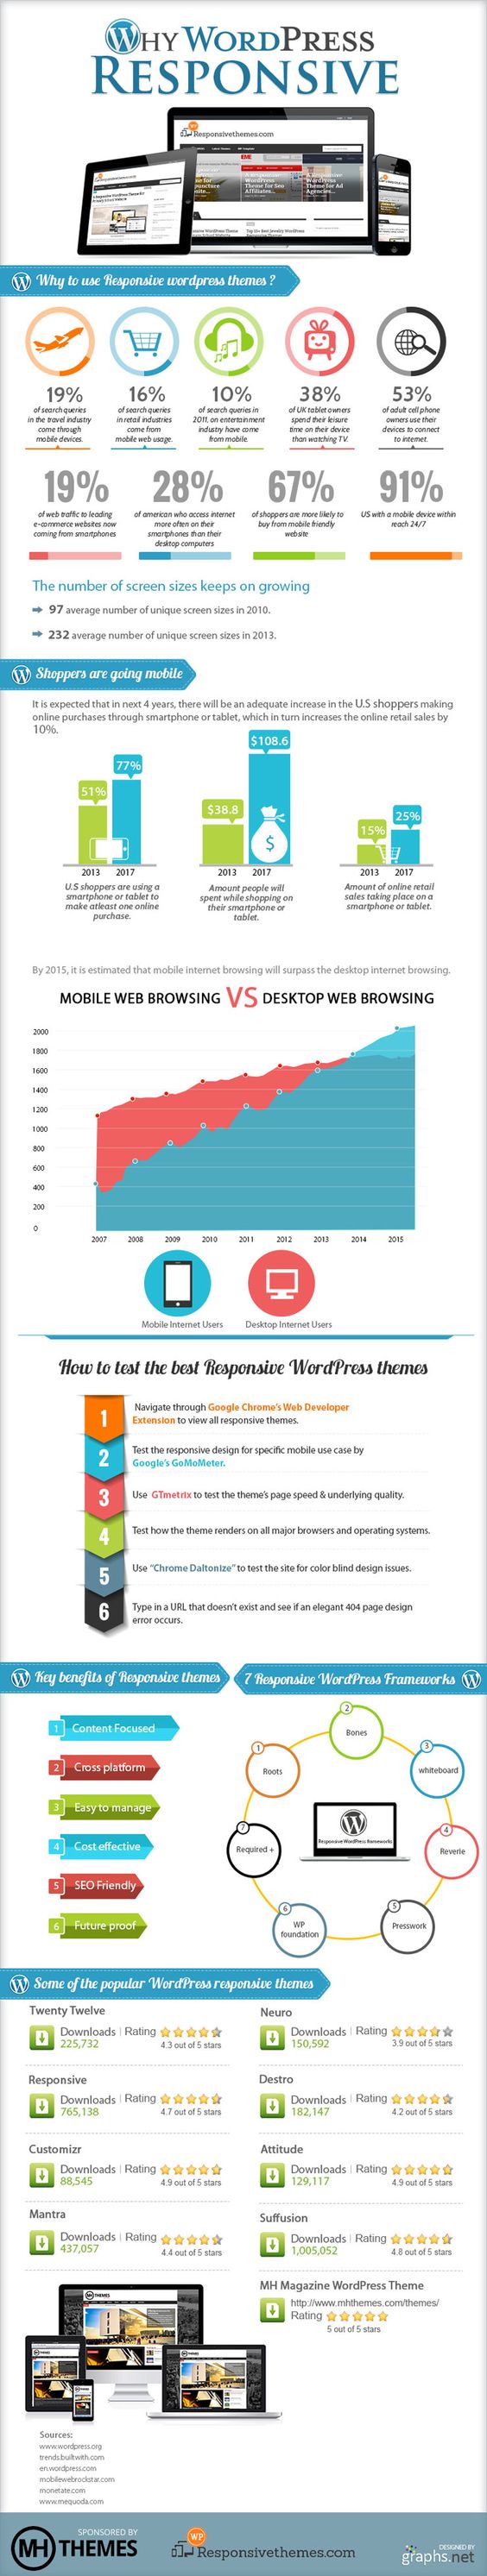 Why use WordPress responsive Themes, an infographic.